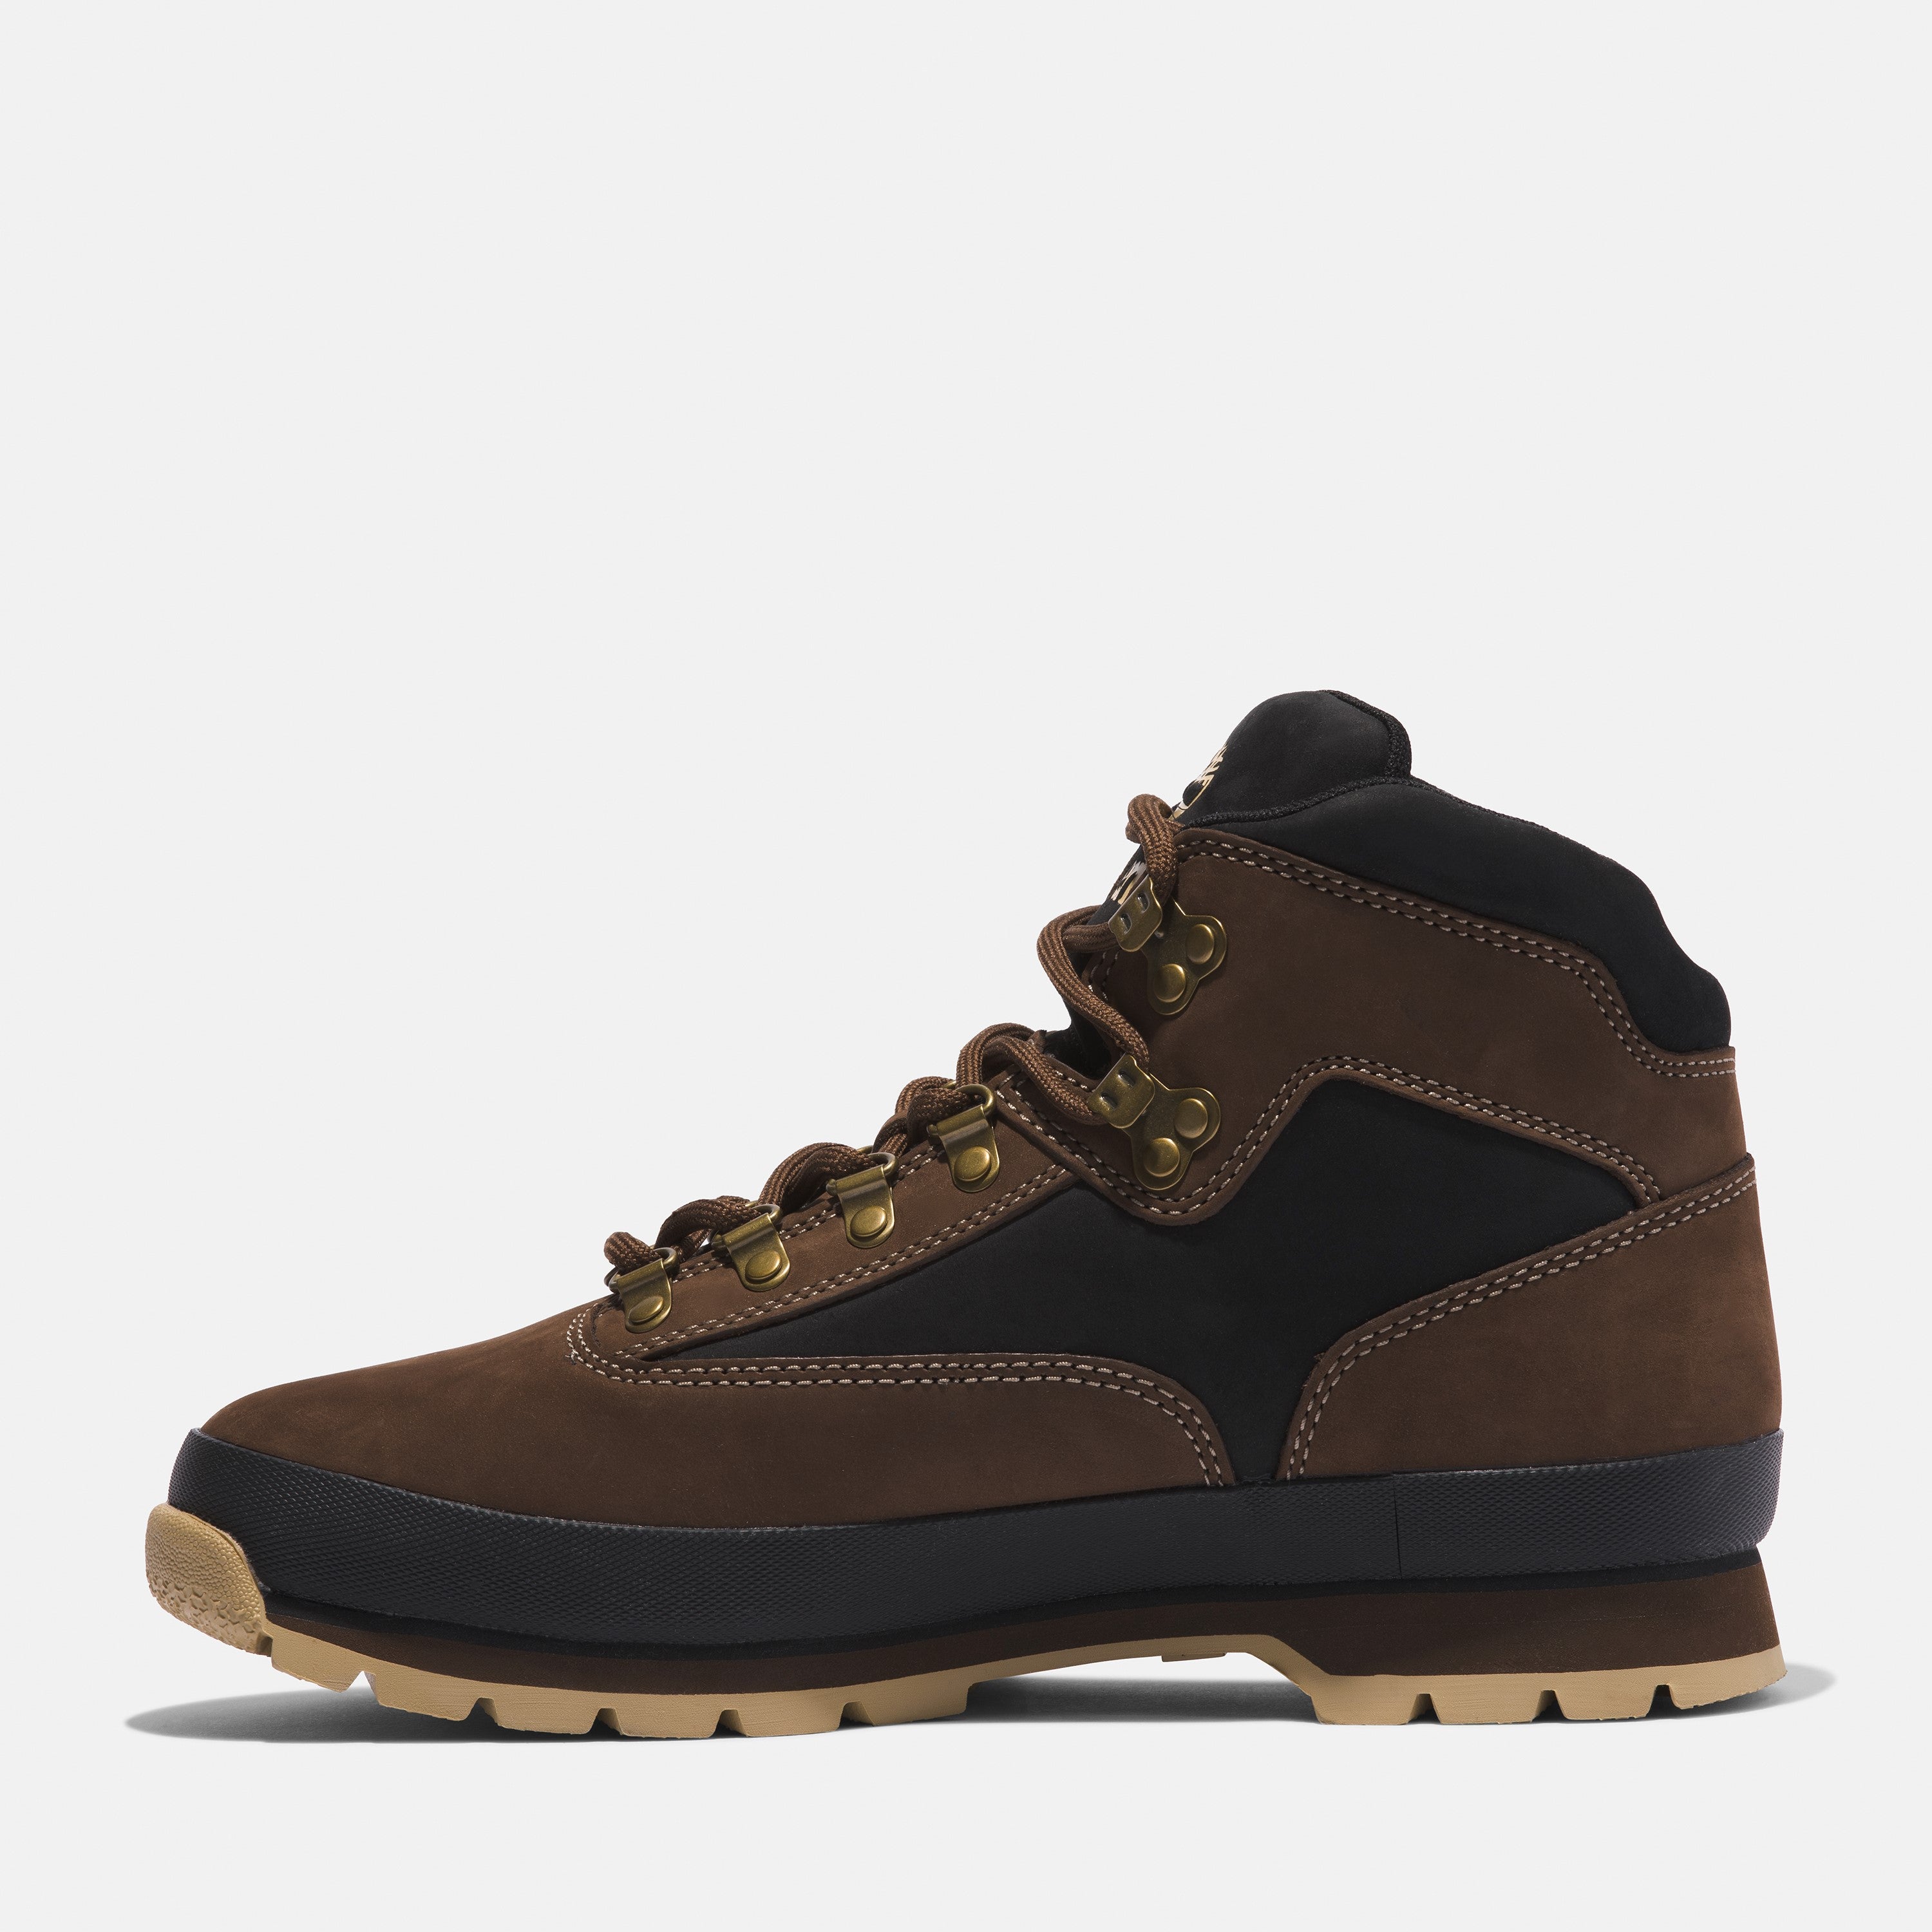 Timberland Euro Hiker Mid Leather Boots Cocoa Brown